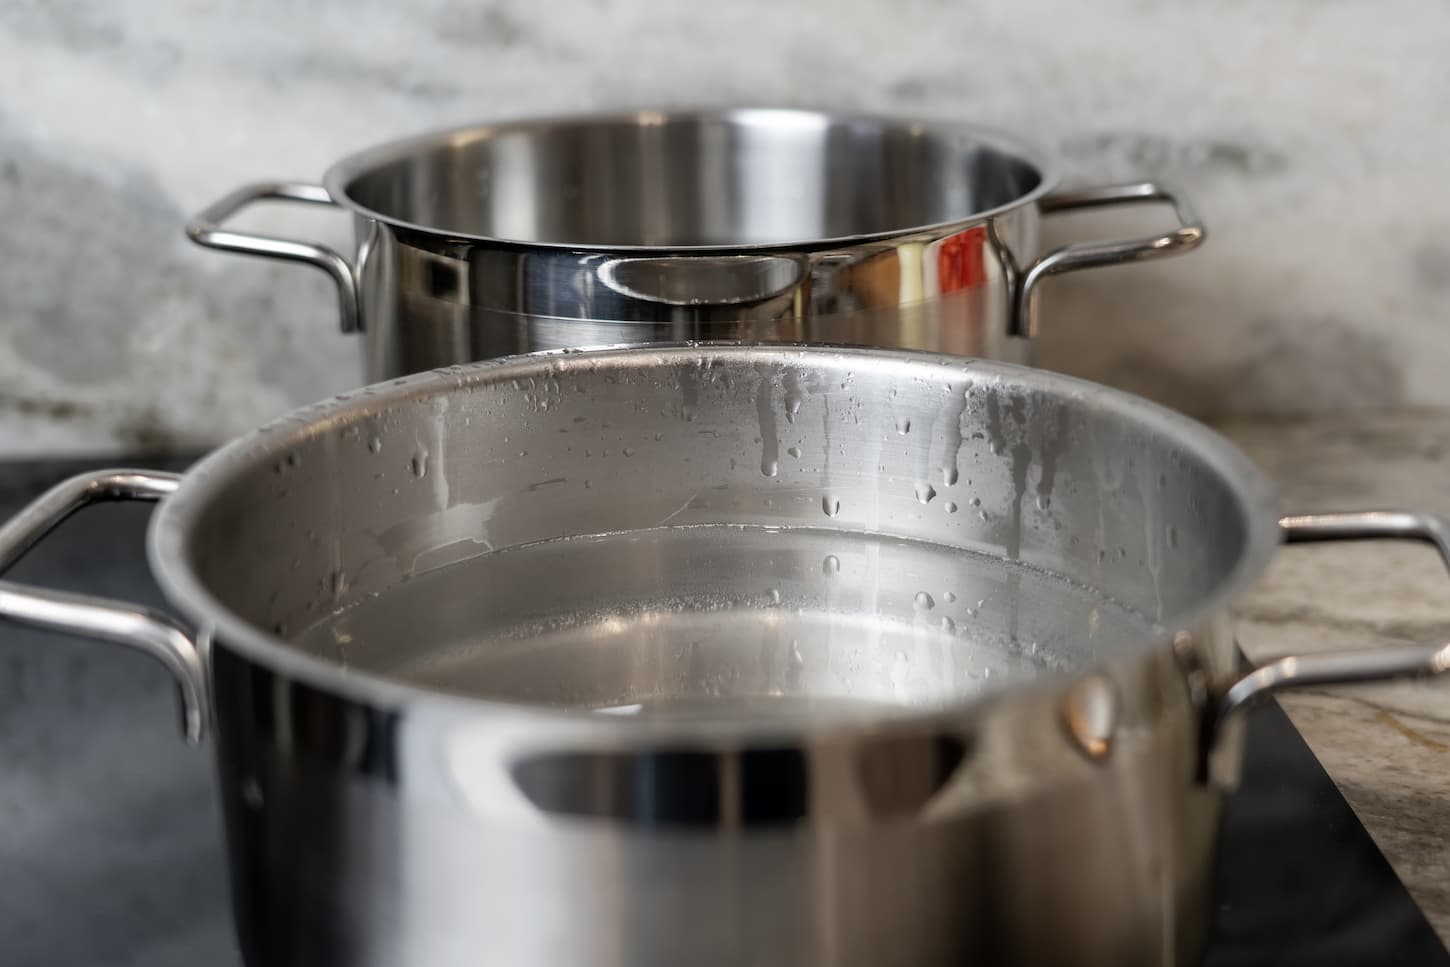 Storing Food In Metal Pots? All You Need To Know